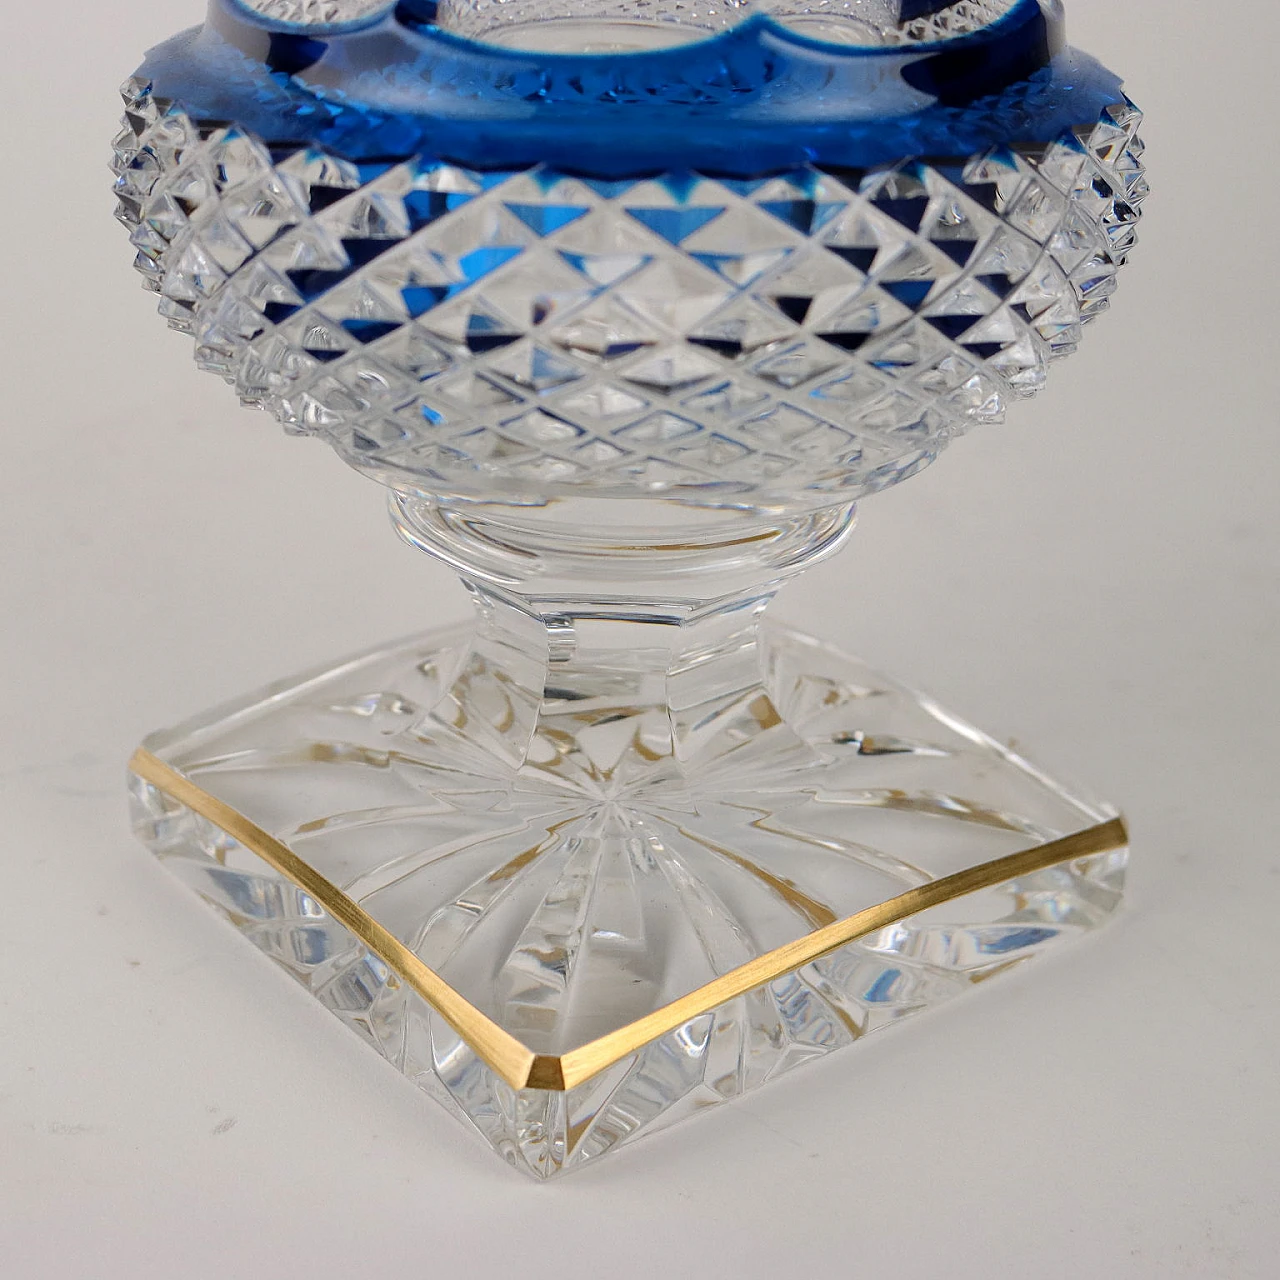 Crystal vase with blue outline and gold decoration by St. Louis 6